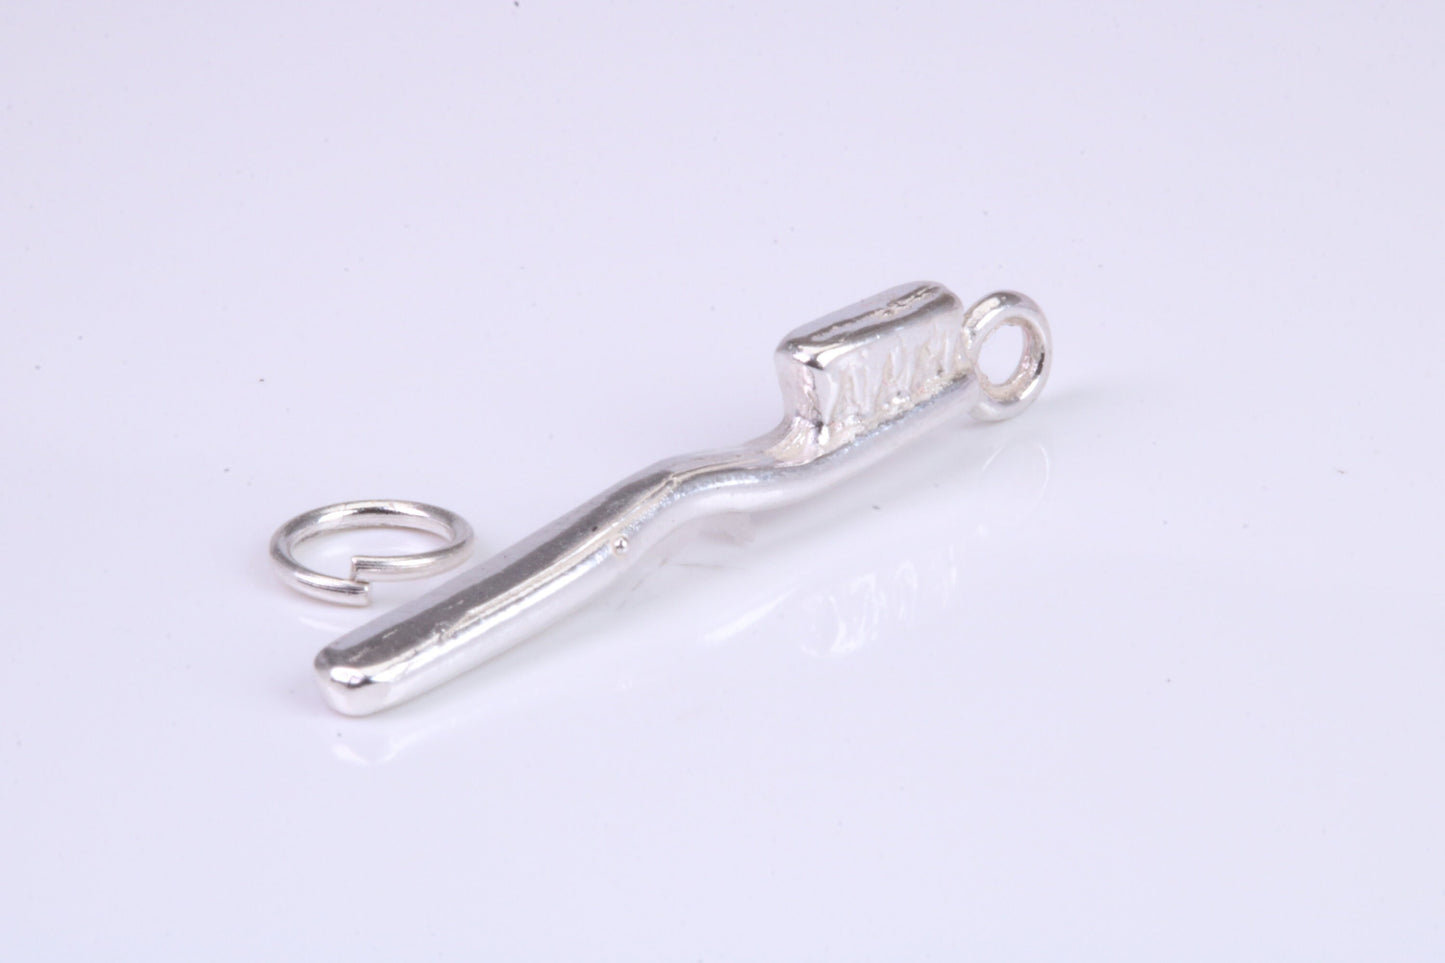 Tooth Brush Charm, Graduation Cap Charm, Traditional Charm, Made from Solid 925 Grade Sterling Silver, Complete with Attachment Link